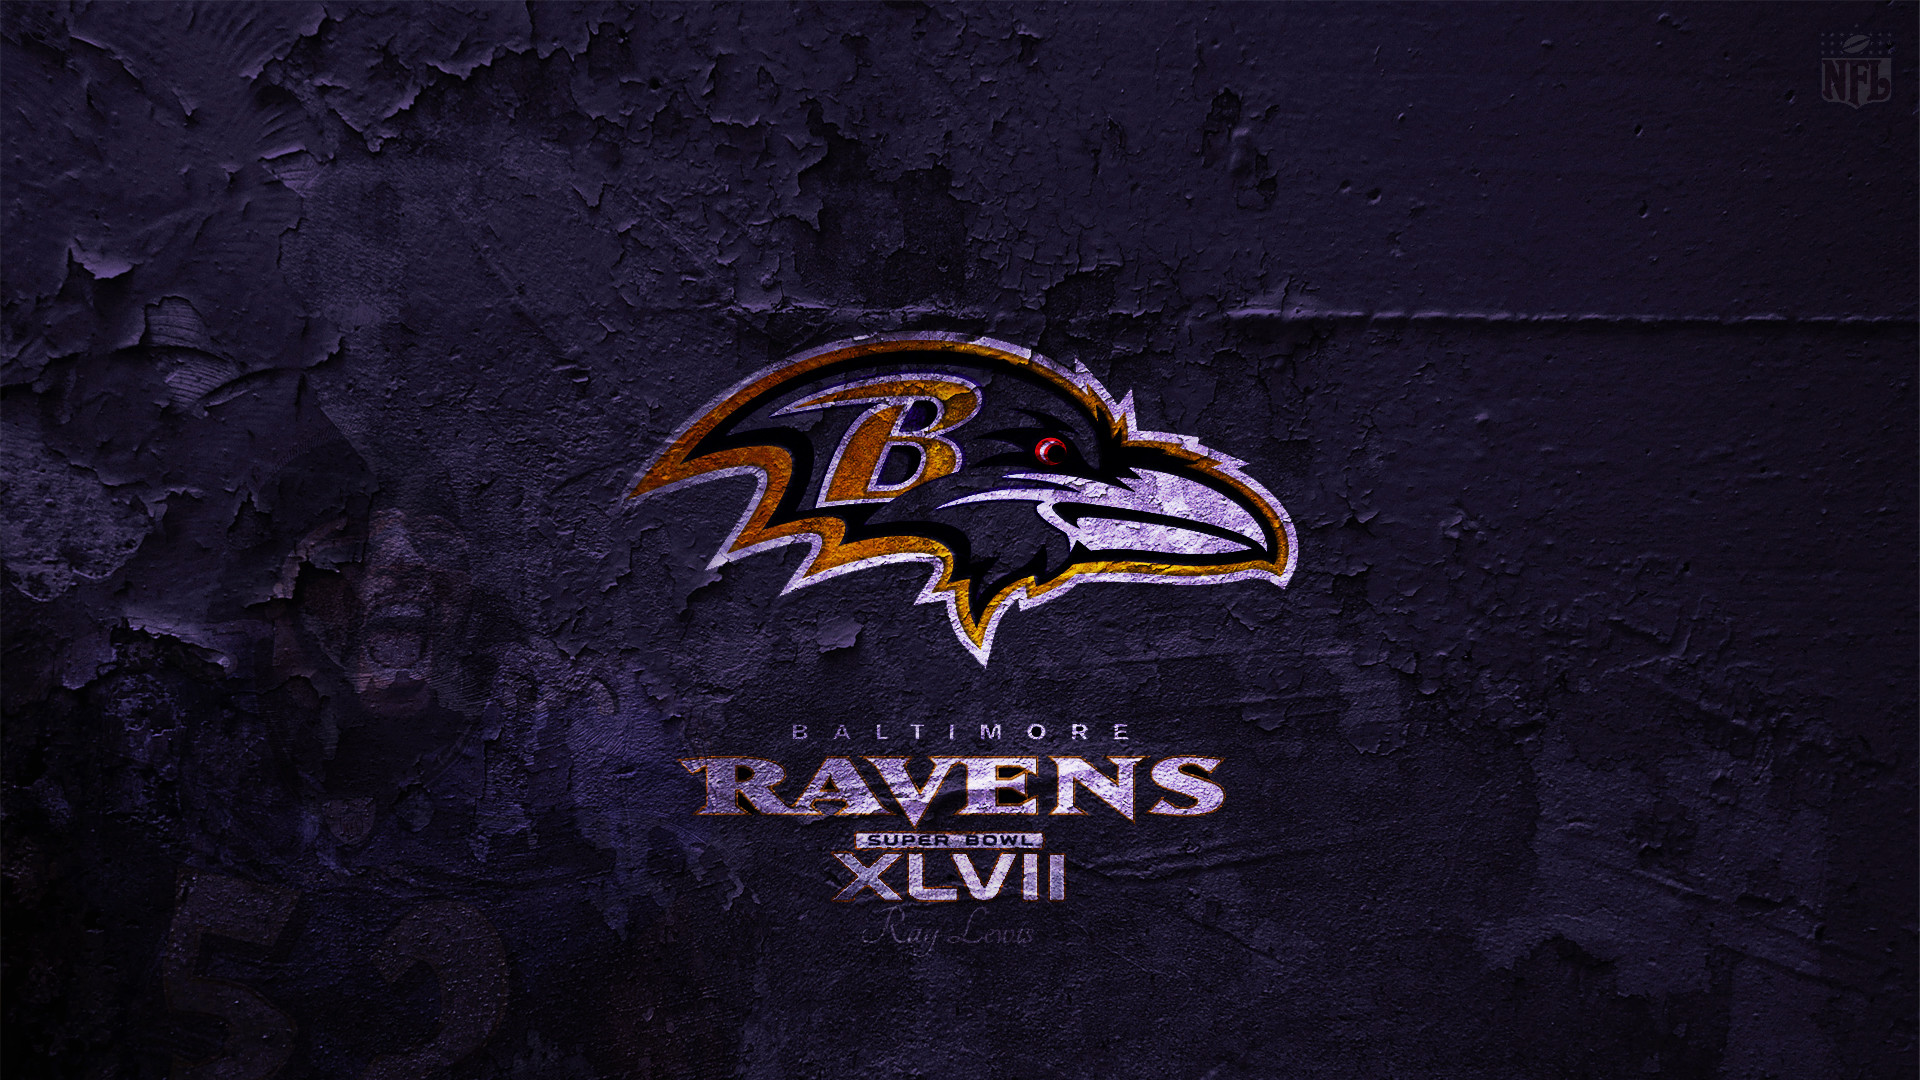 1920x1080 Related Wallpapers from Chicago Bears Wallpaper. Ravens Wallpaper